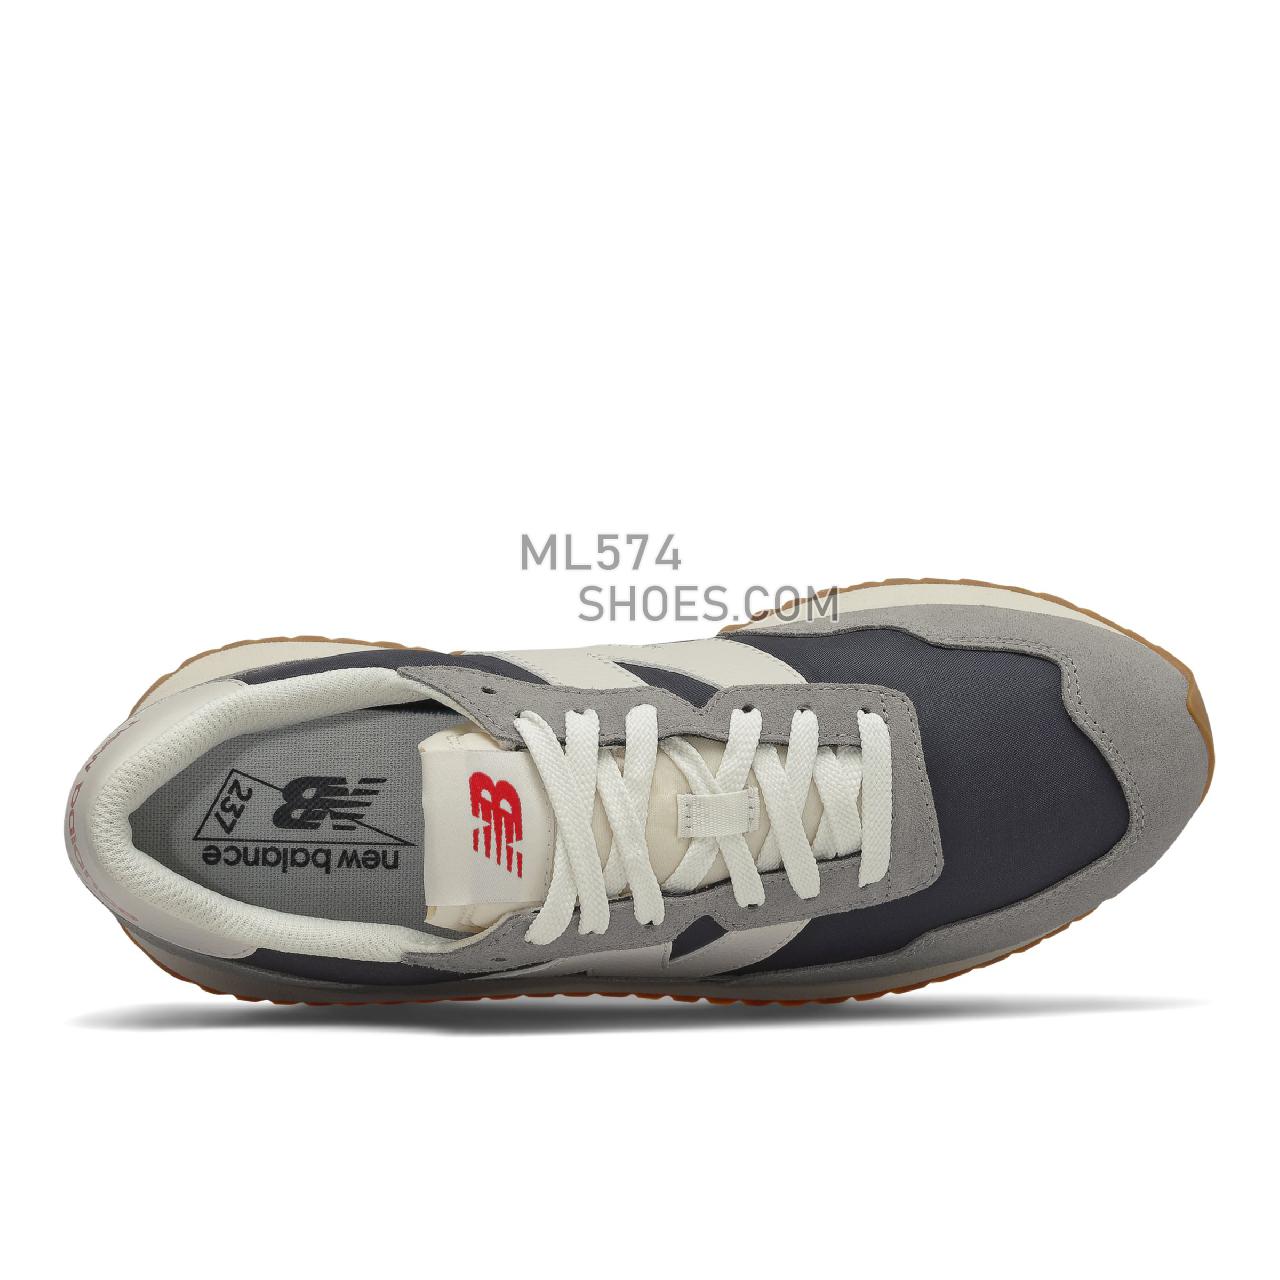 New Balance 237 - Men's Classic Sneakers - Marblehead with Moonbeam - MS237SC